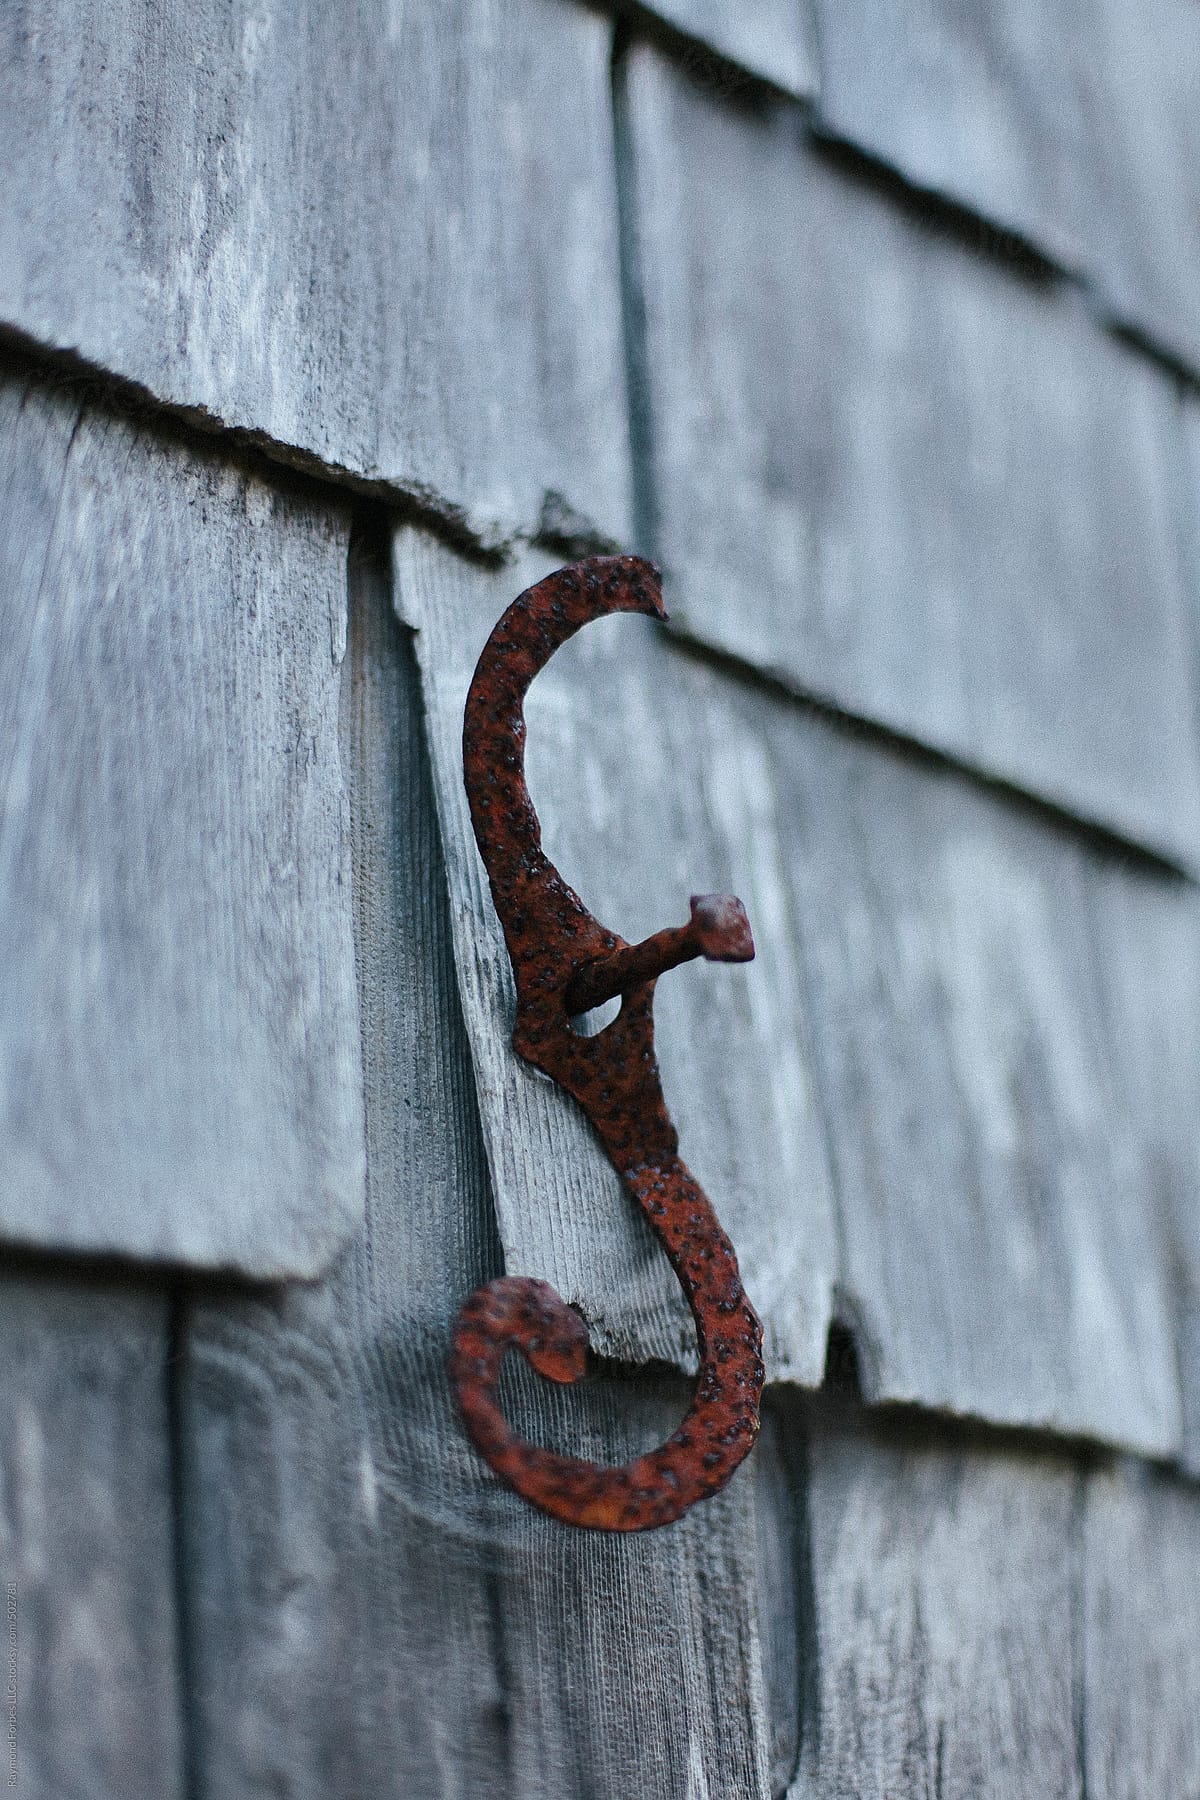 Weathered Shingles on Cottage of Cape Cod Cottage